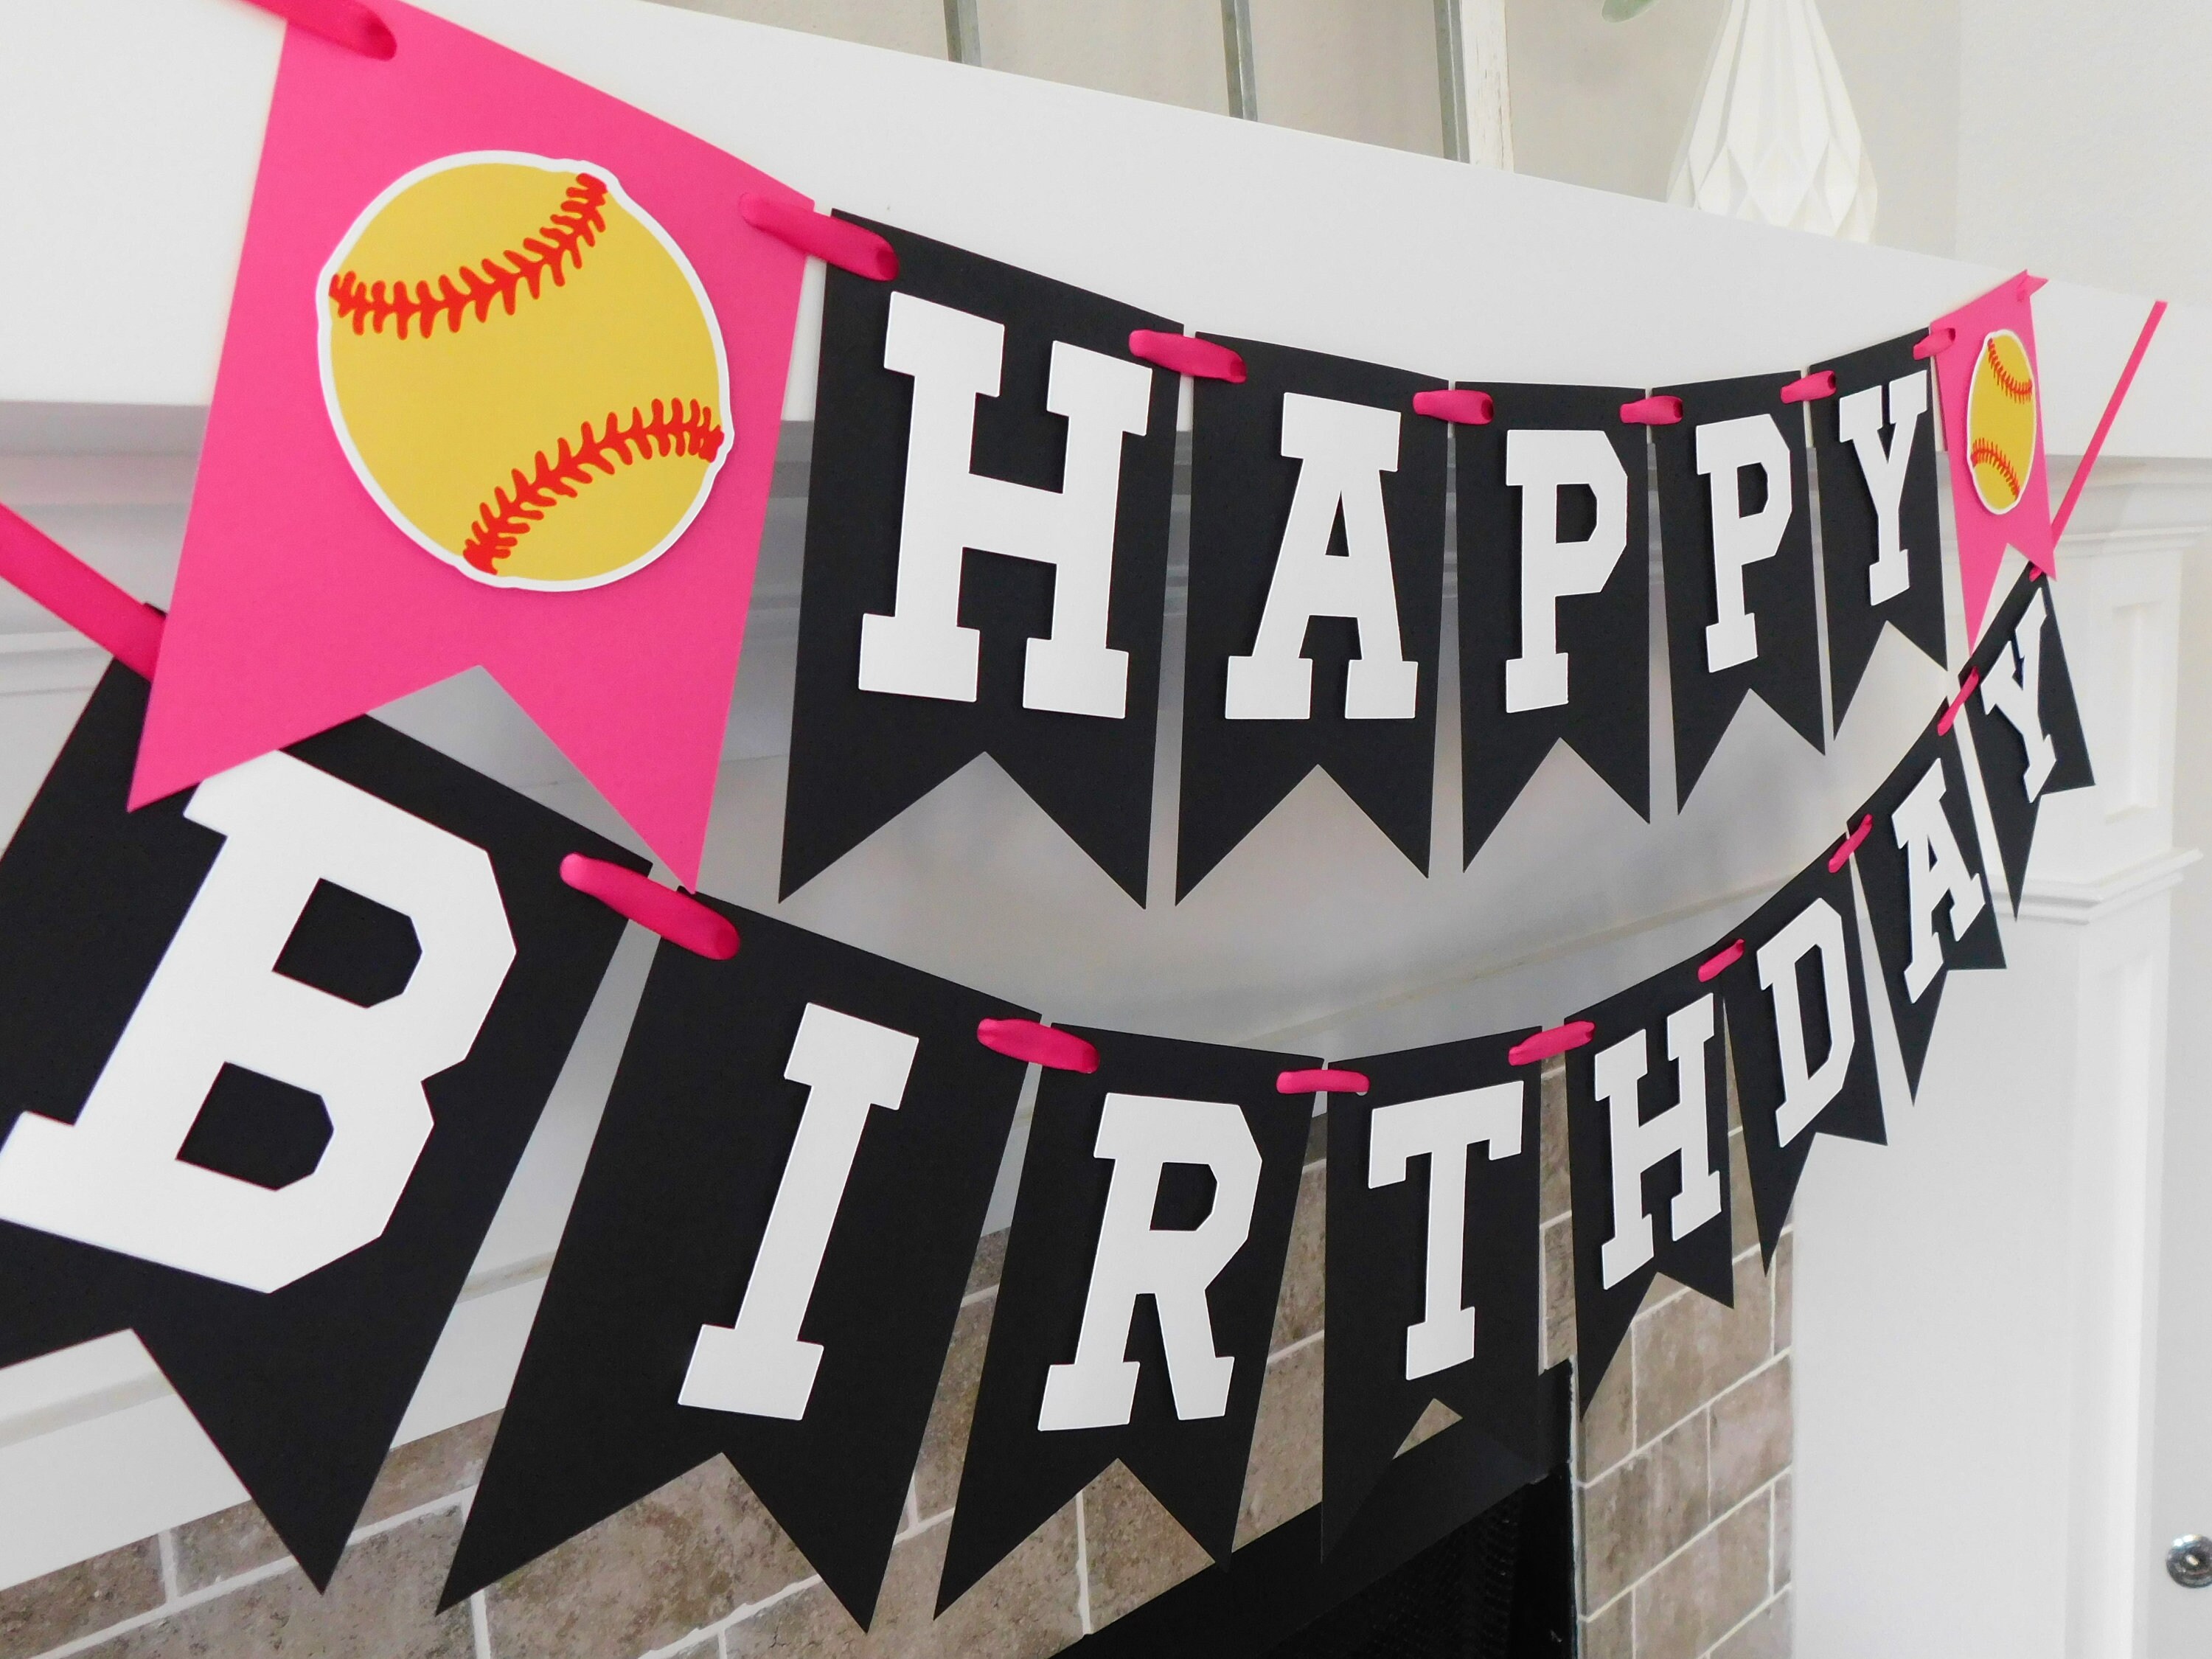 FASTPITCH SOFTBALL PERSONALIZED BANNER Party Supplies FREE SHIPPING 